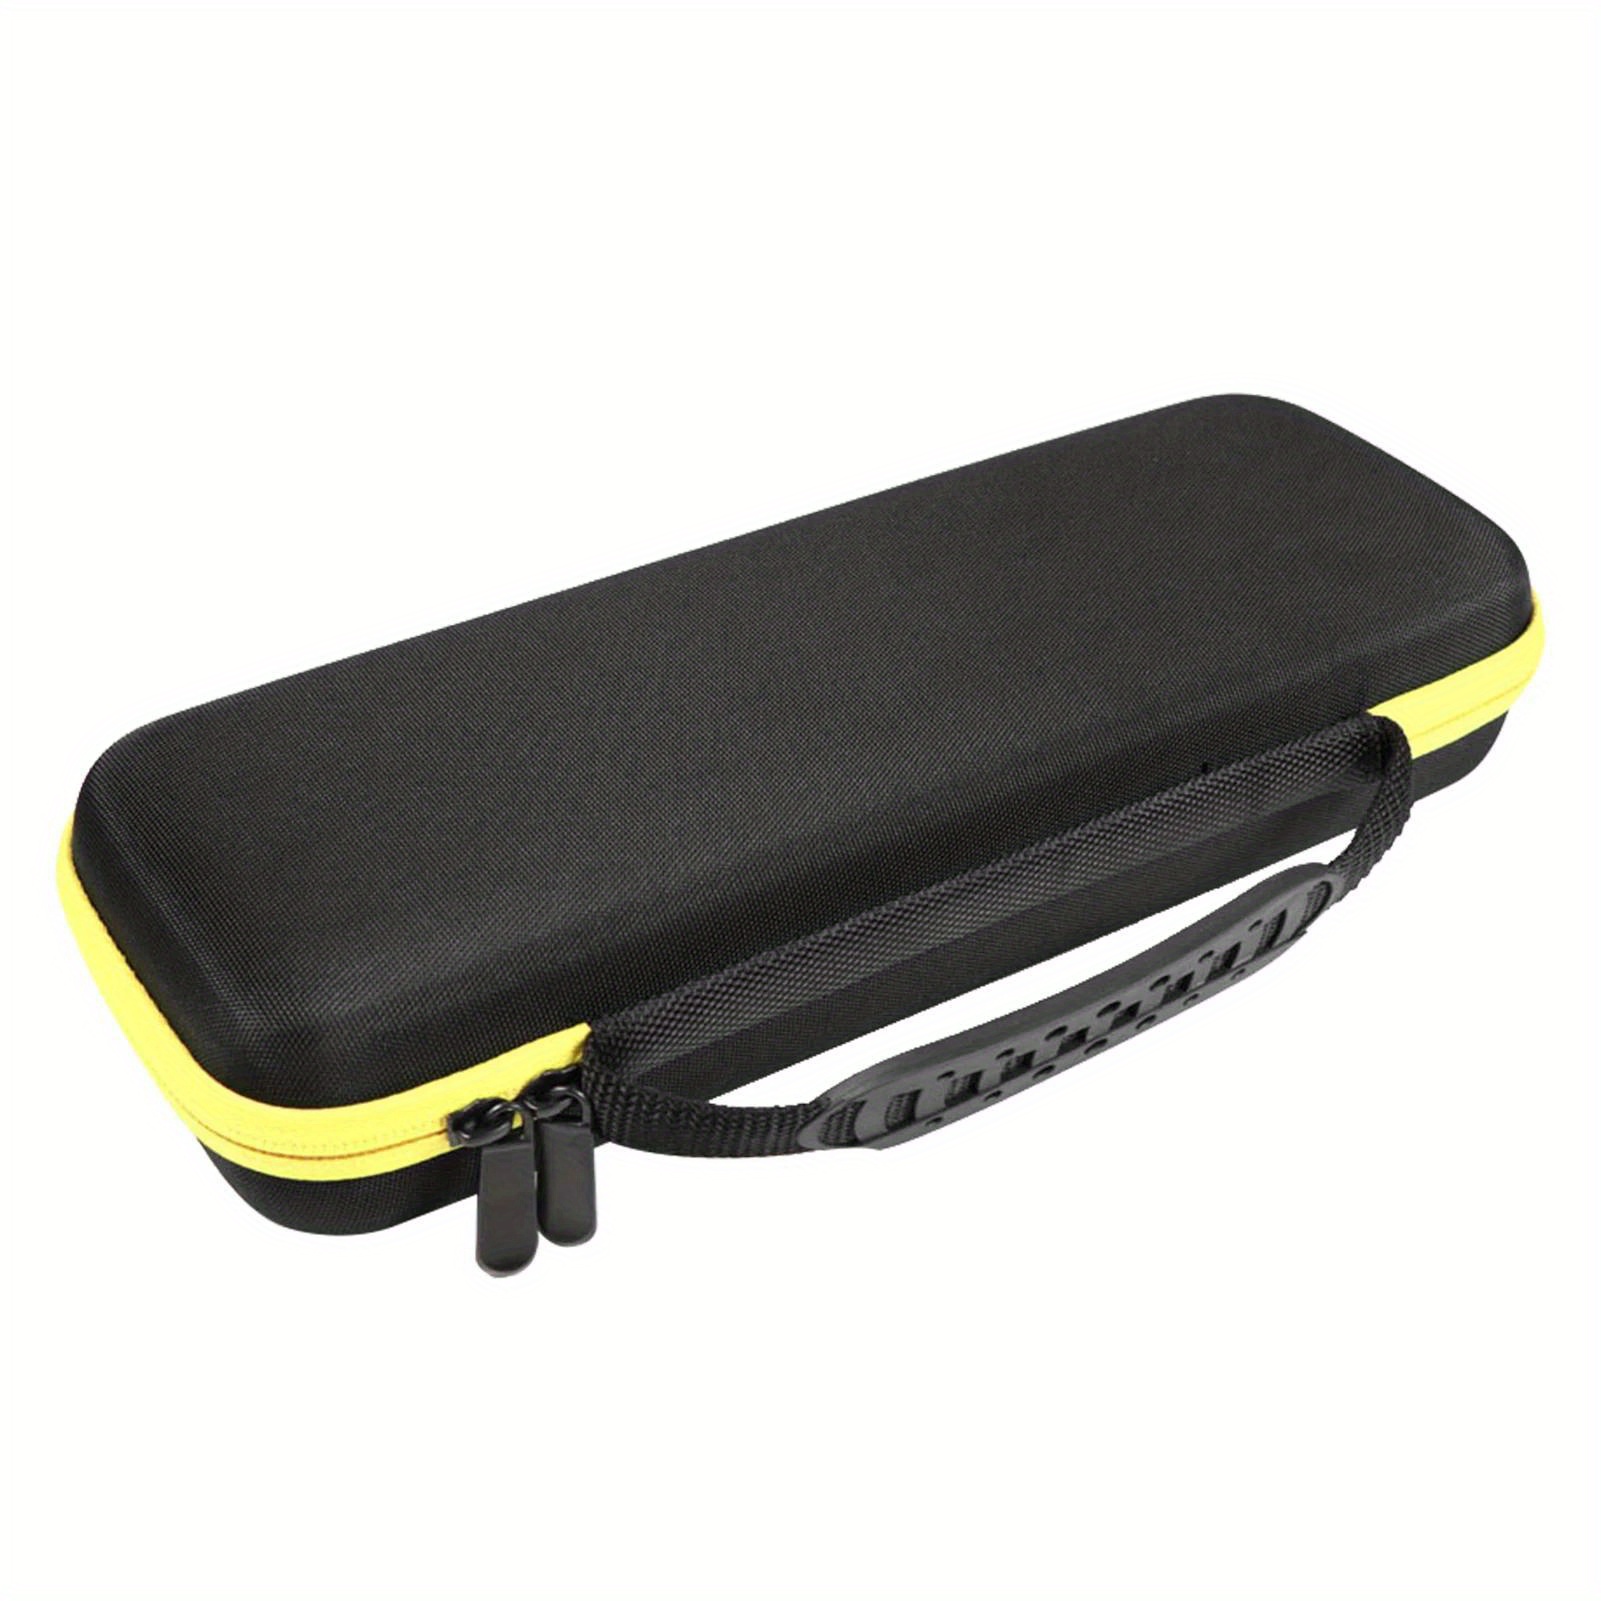 

Multimeter Storage Case Carrying Storage Bag For Multimeter, Protective Hard Case Replacement For Fluke T5-1000/t5-600